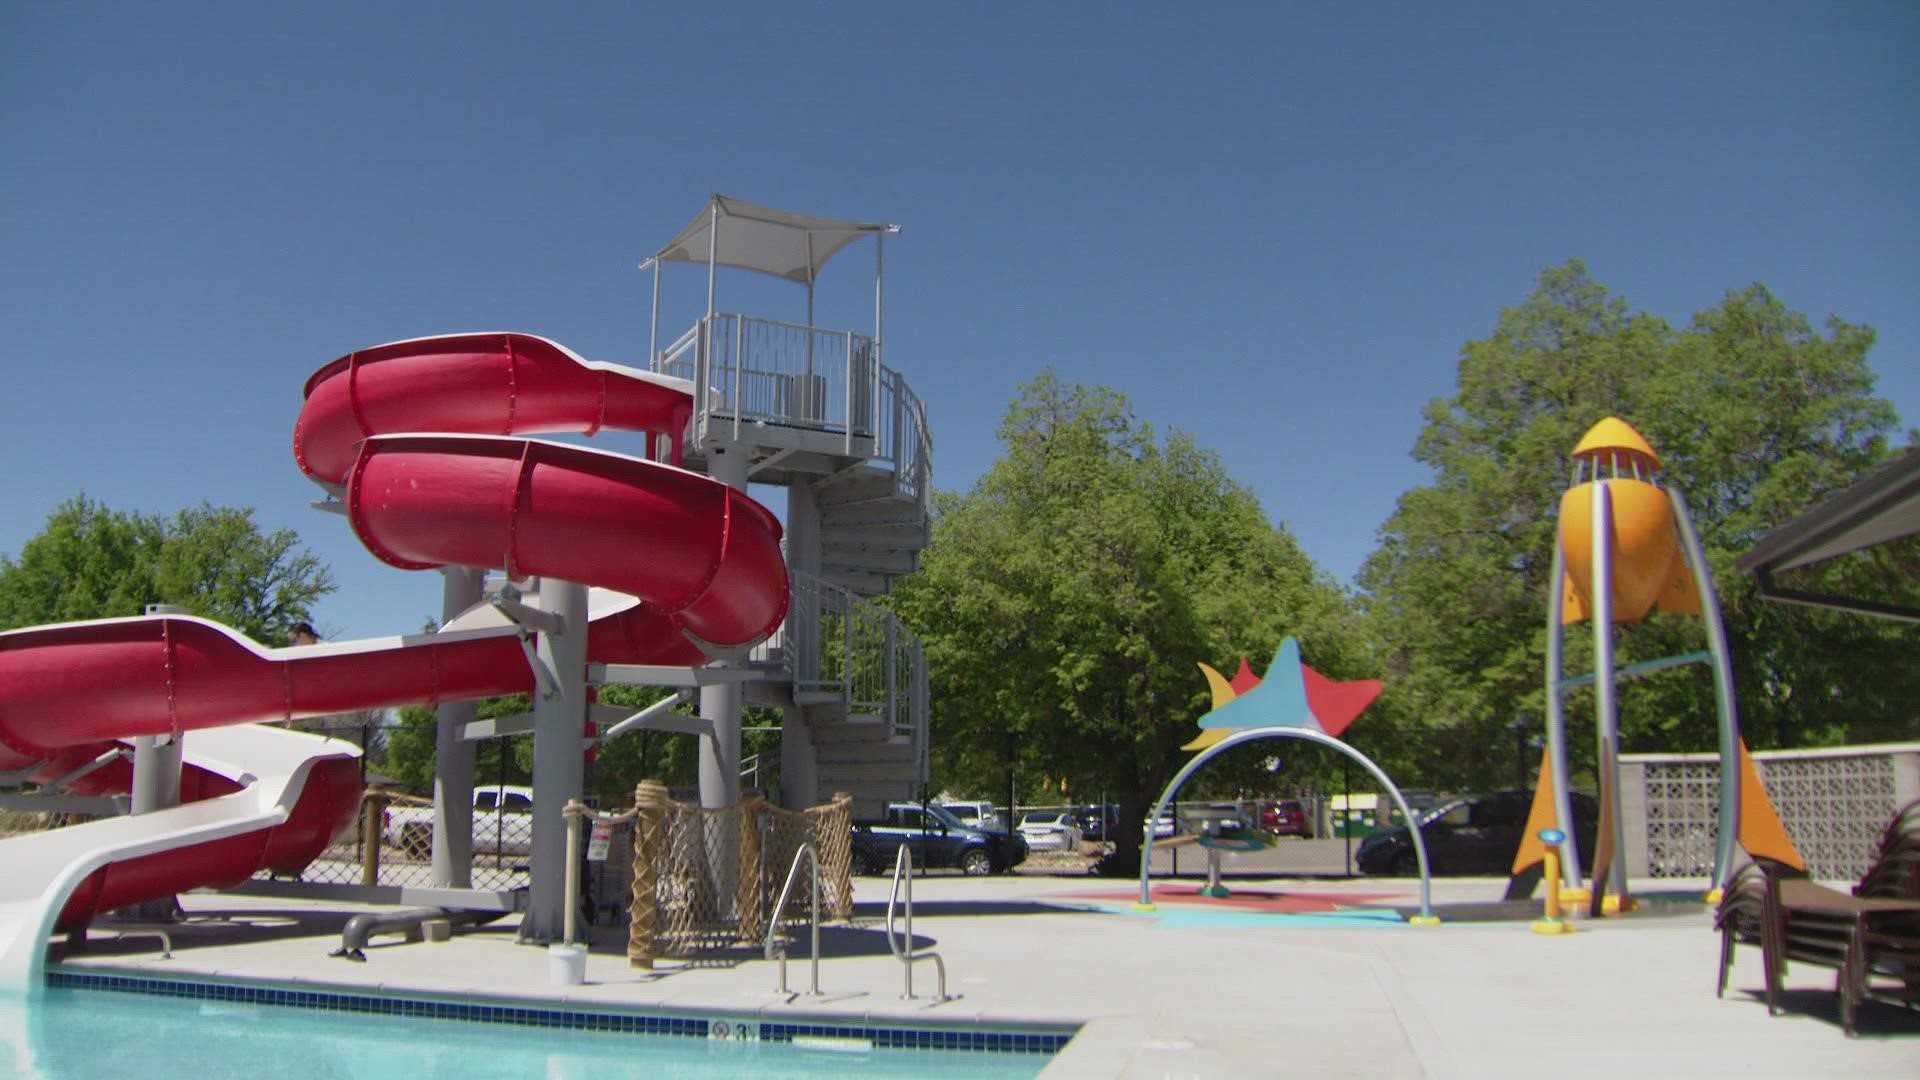 Denver will close several indoor pools this summer so there's enough staff for outdoor pools.